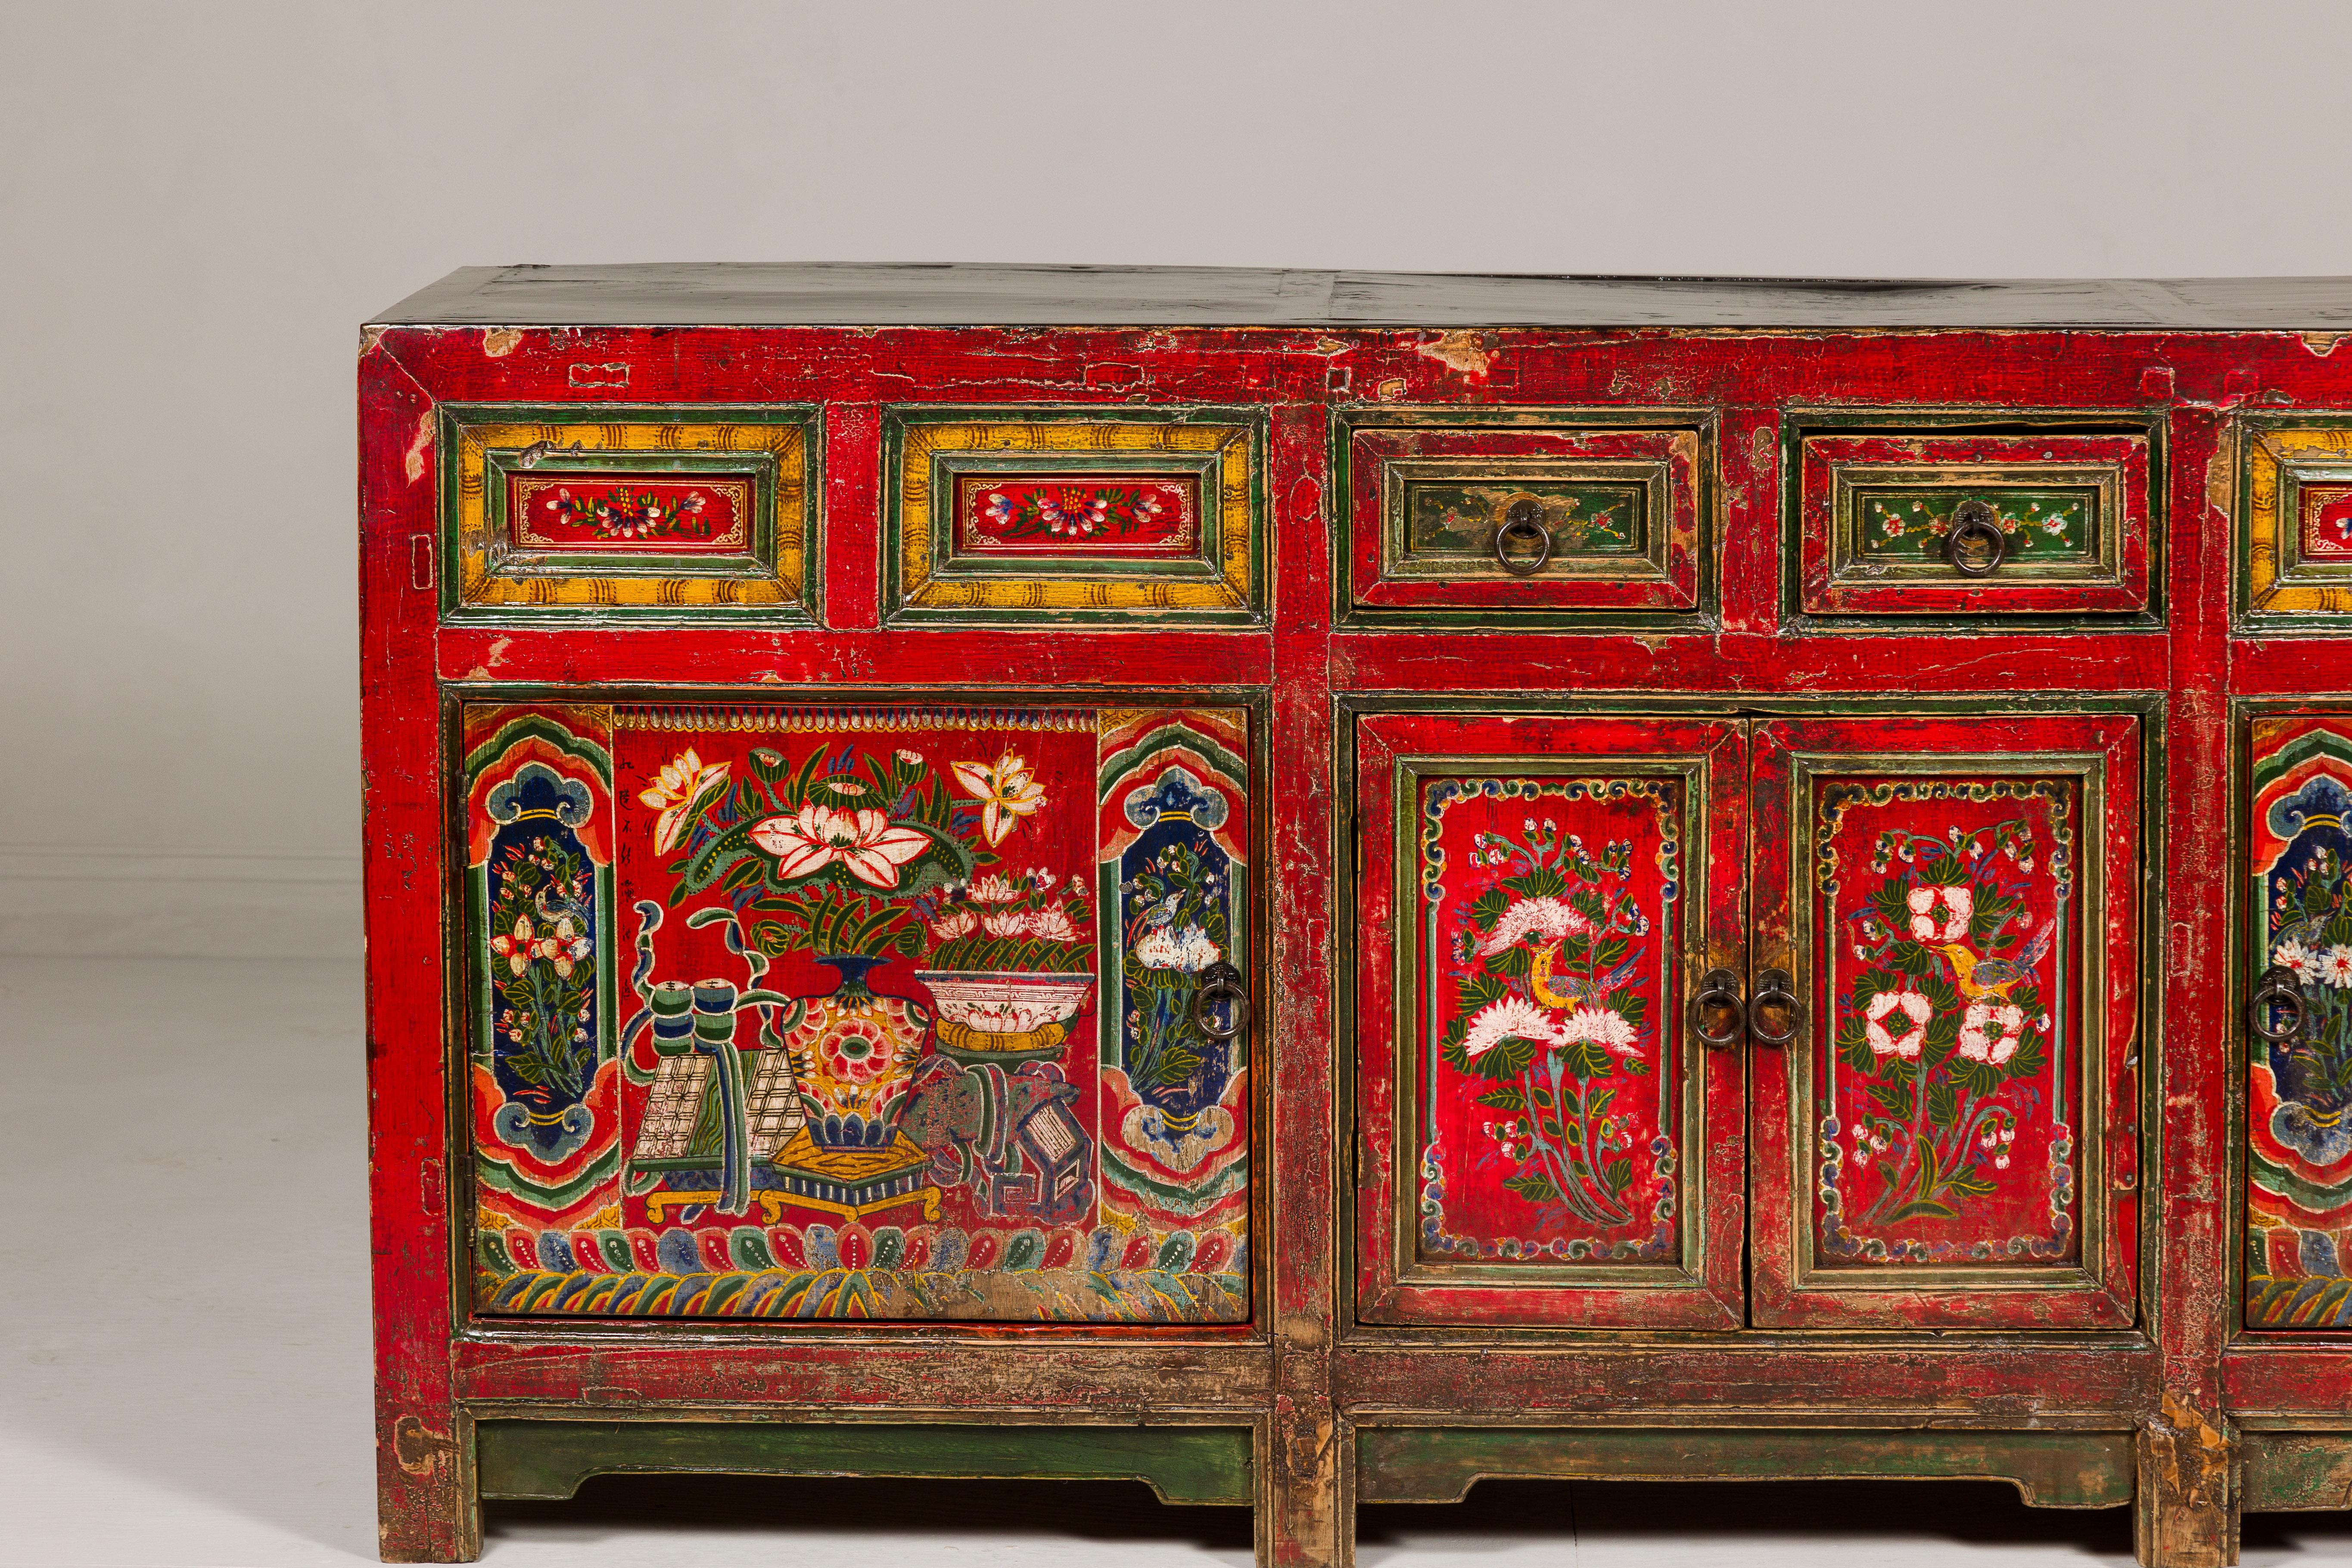 19th Century Mongolian Polychrome Sideboard with Doors, Drawers and Floral Décor For Sale 1